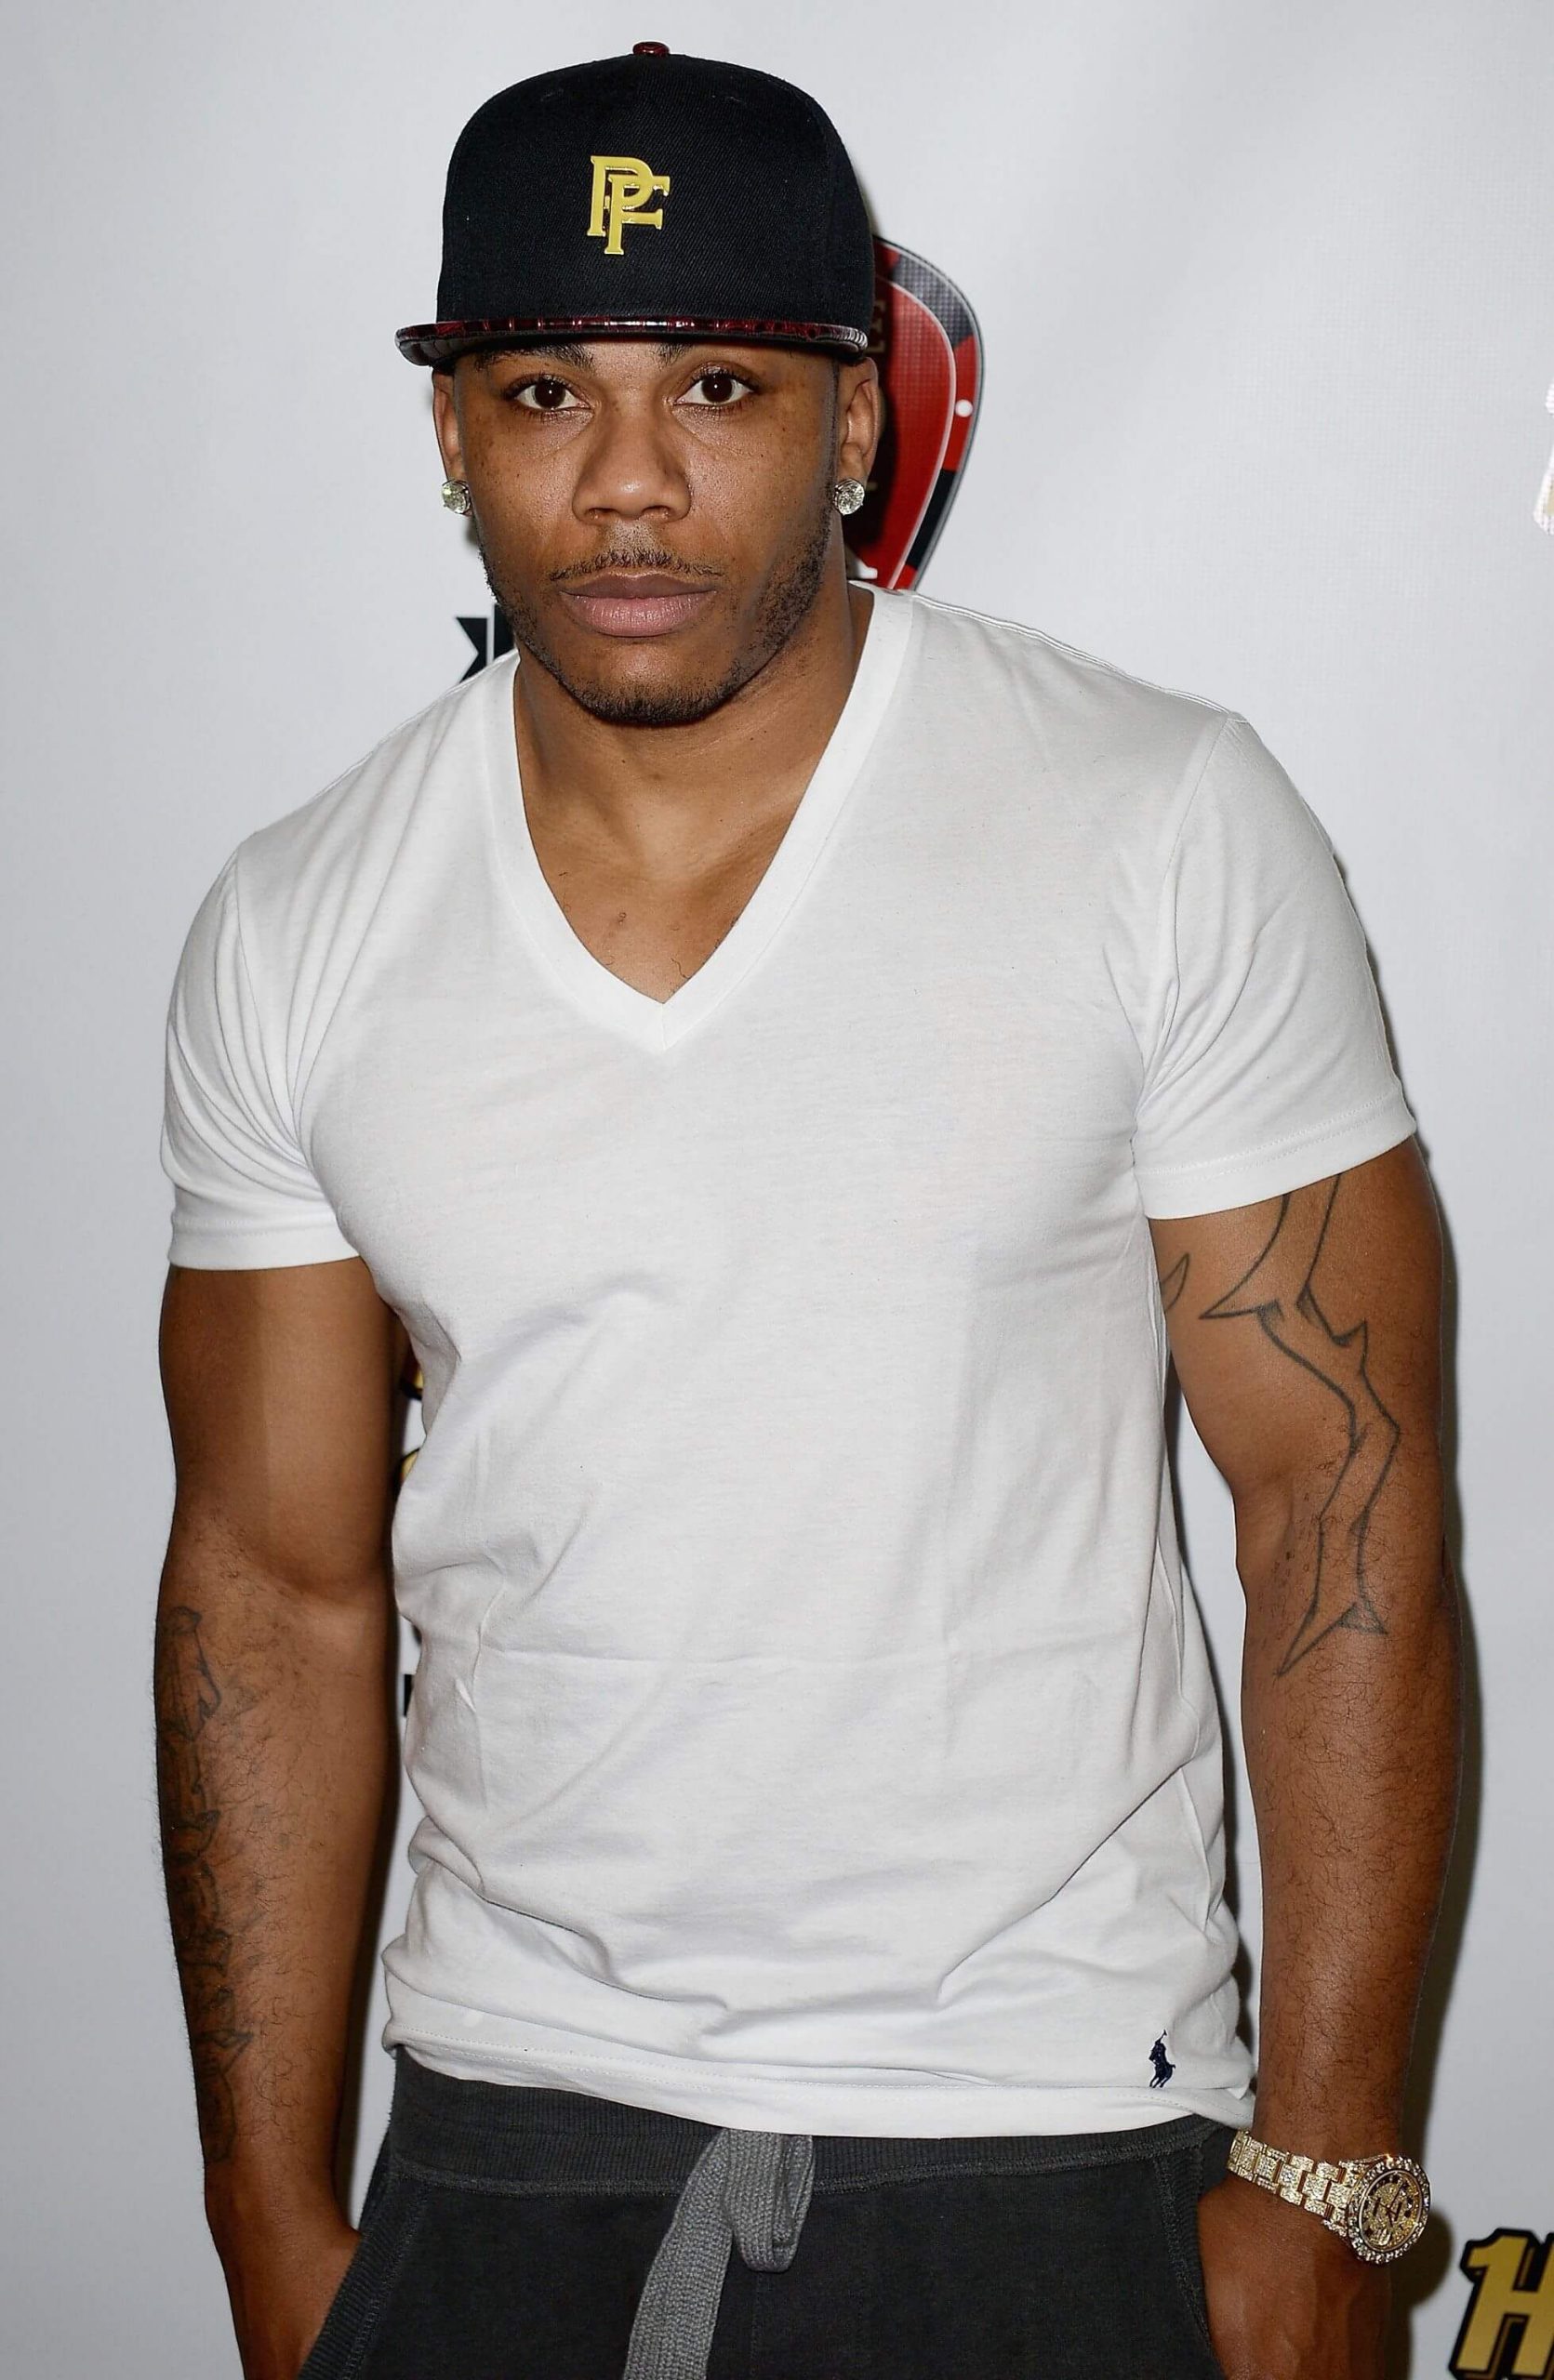 Nelly Net Worth, Age, Height, Weight, Awards, and Achievements